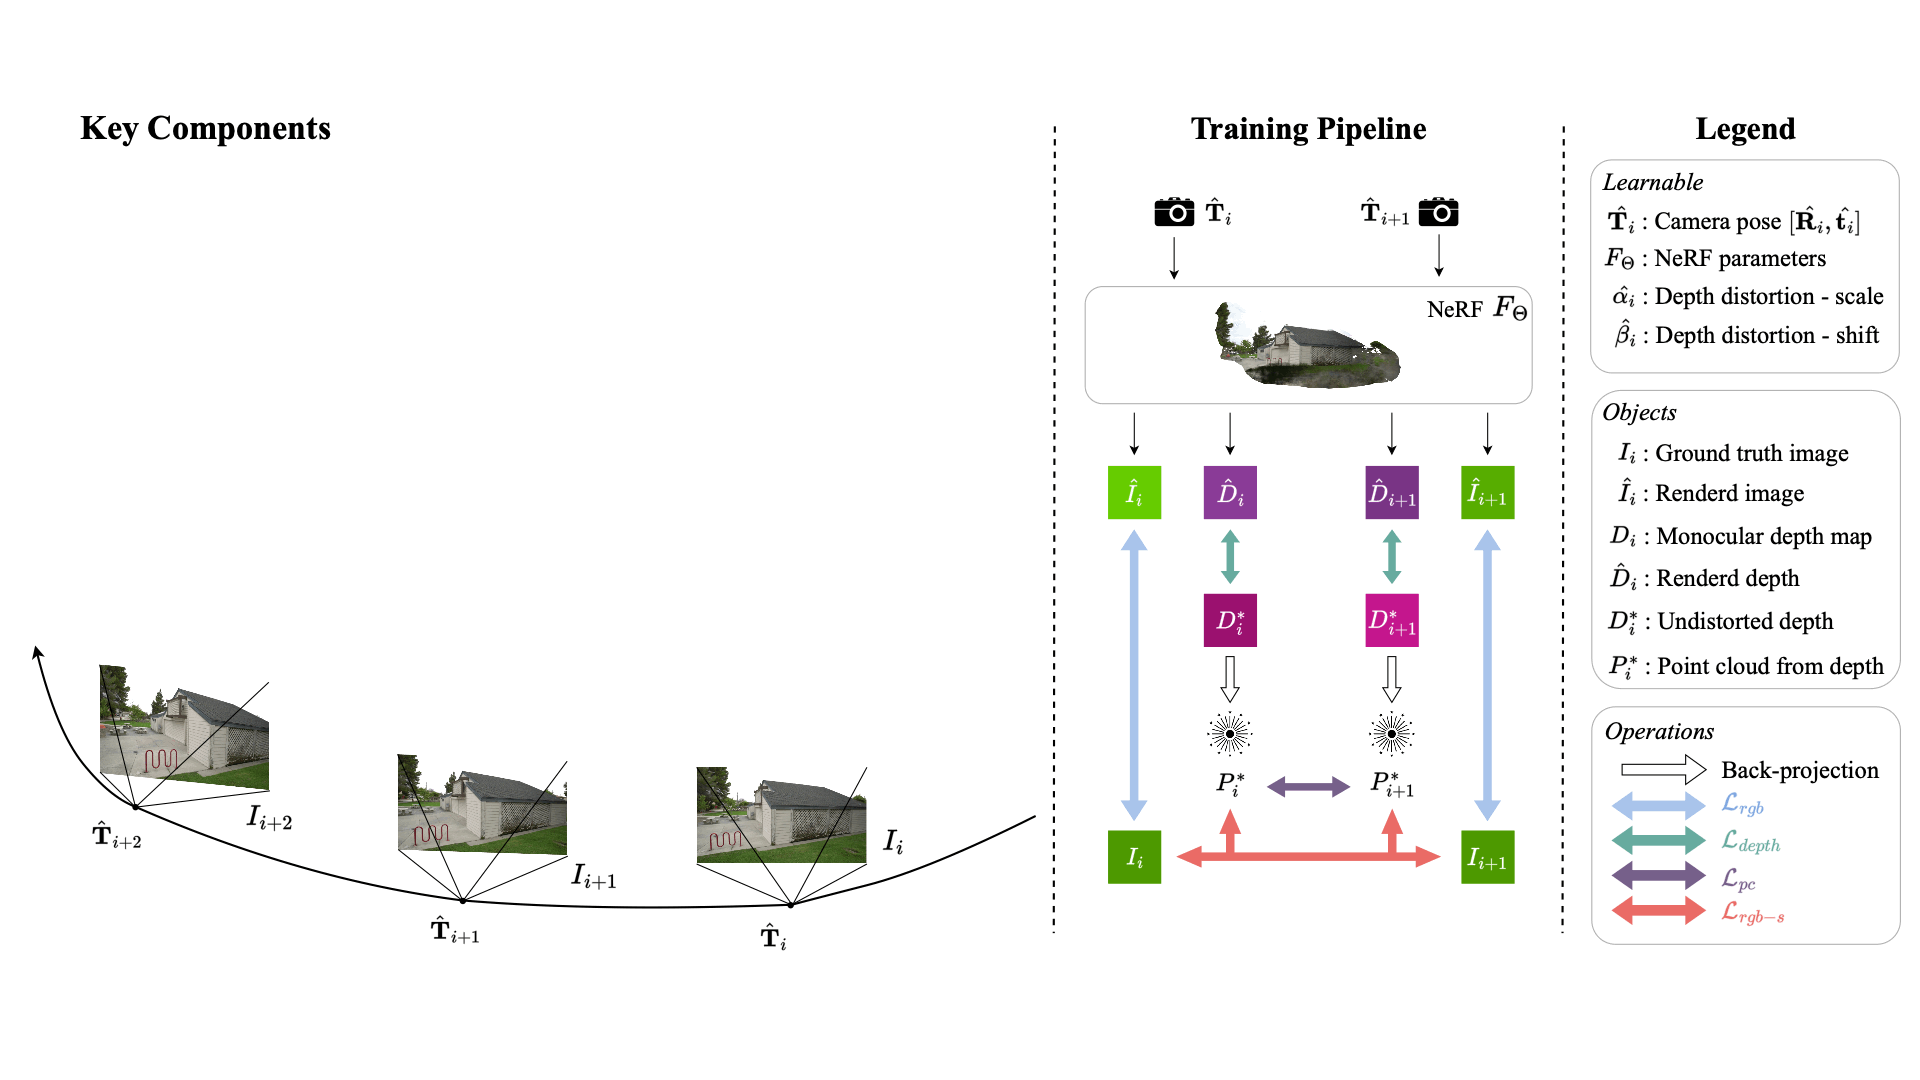 Model Overview